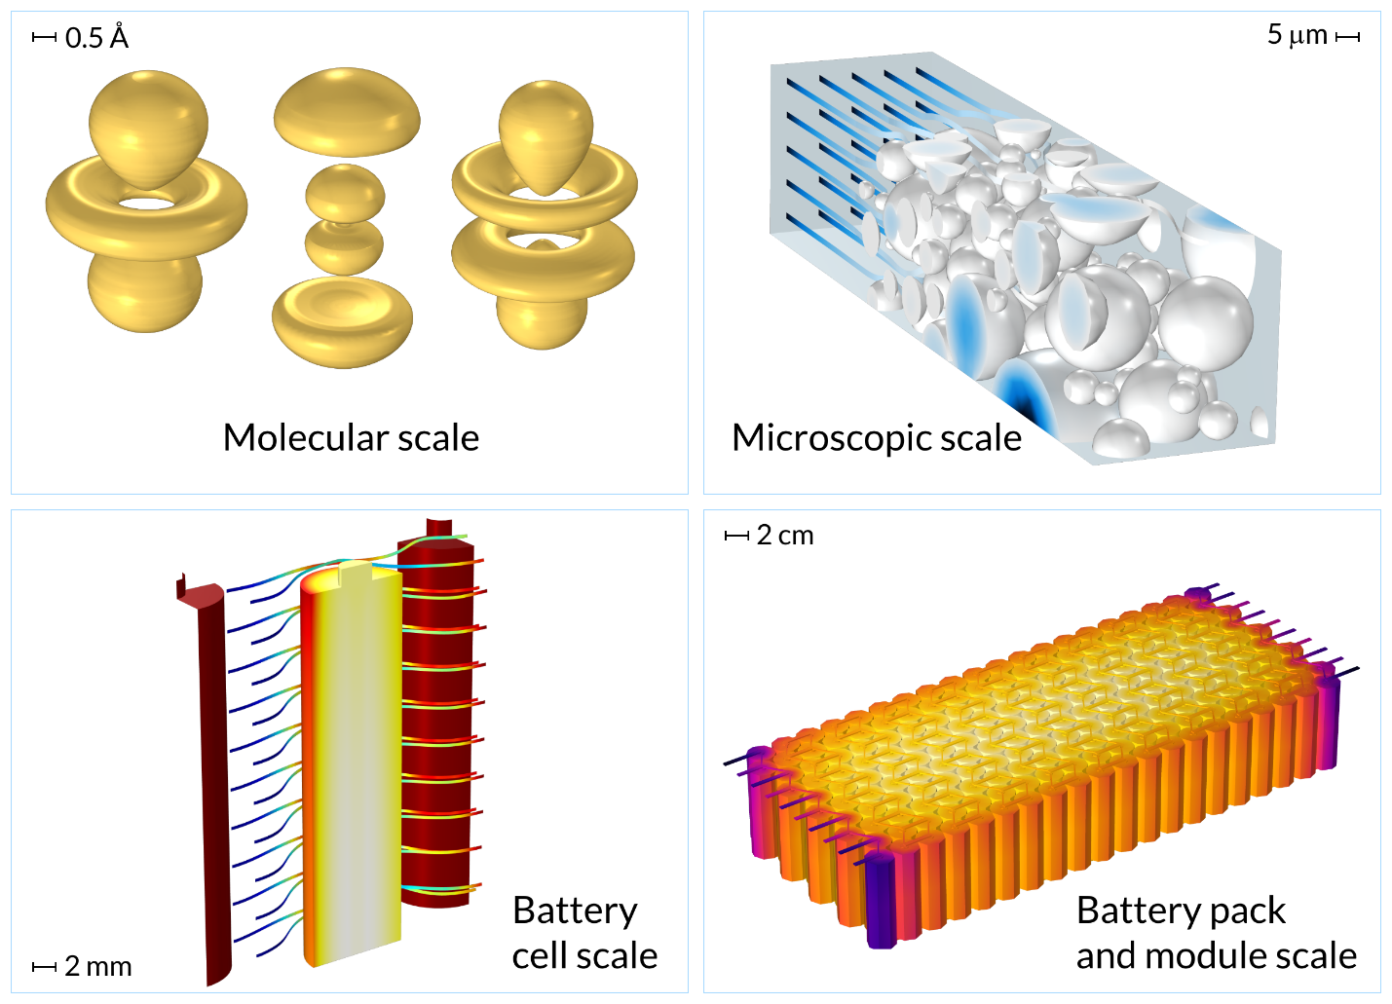 COMSOL battery modeling and simulation provide an efficient and low